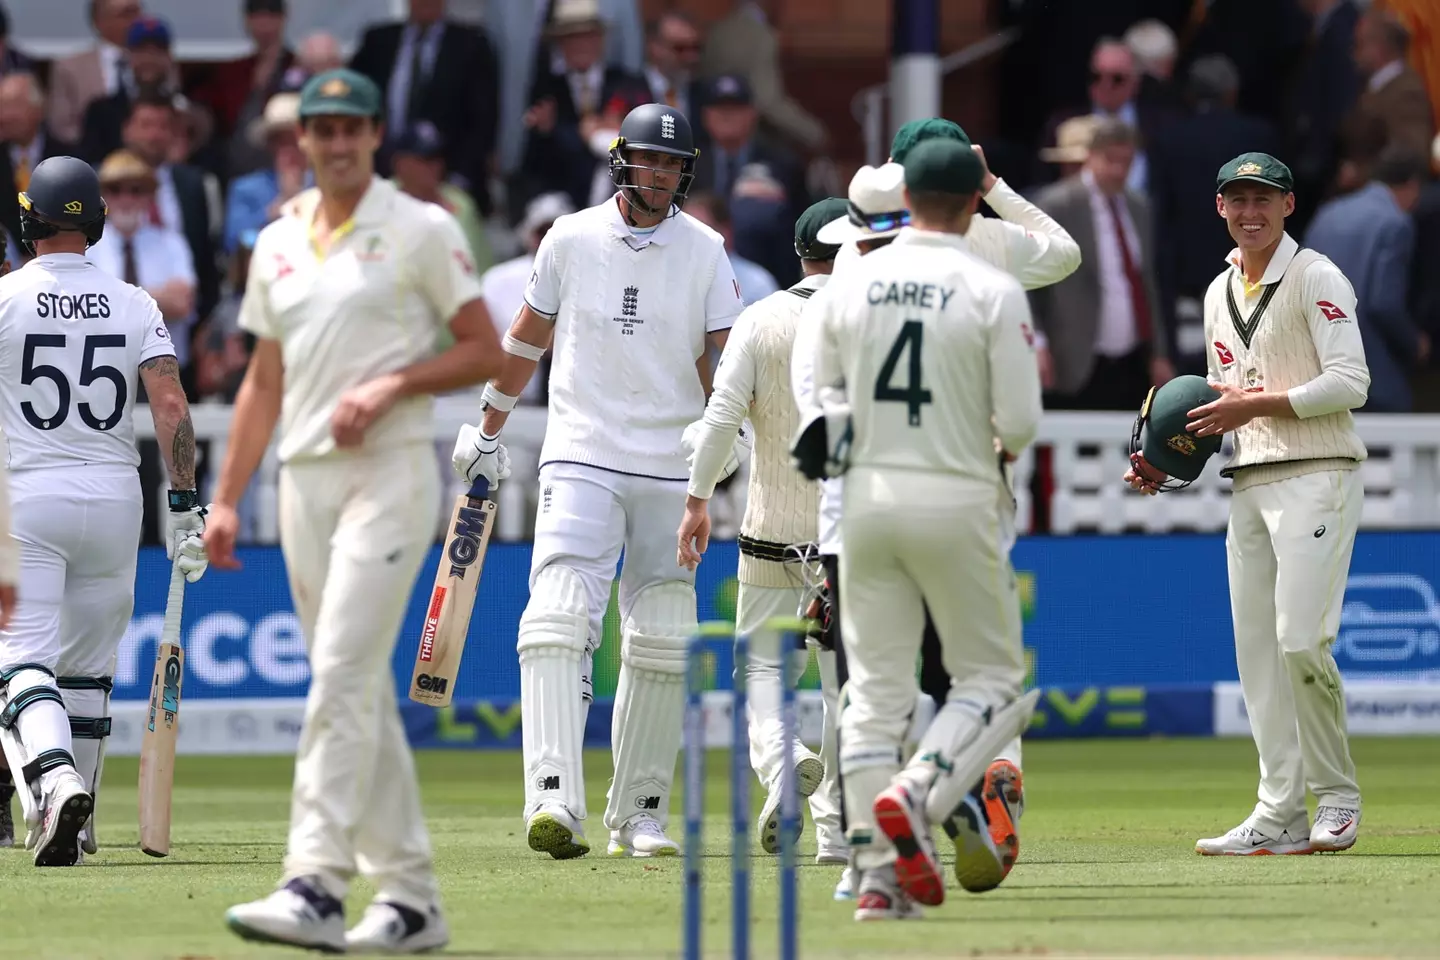 Broad clearly wasn't happy, also confronting David Warner. Image: Getty